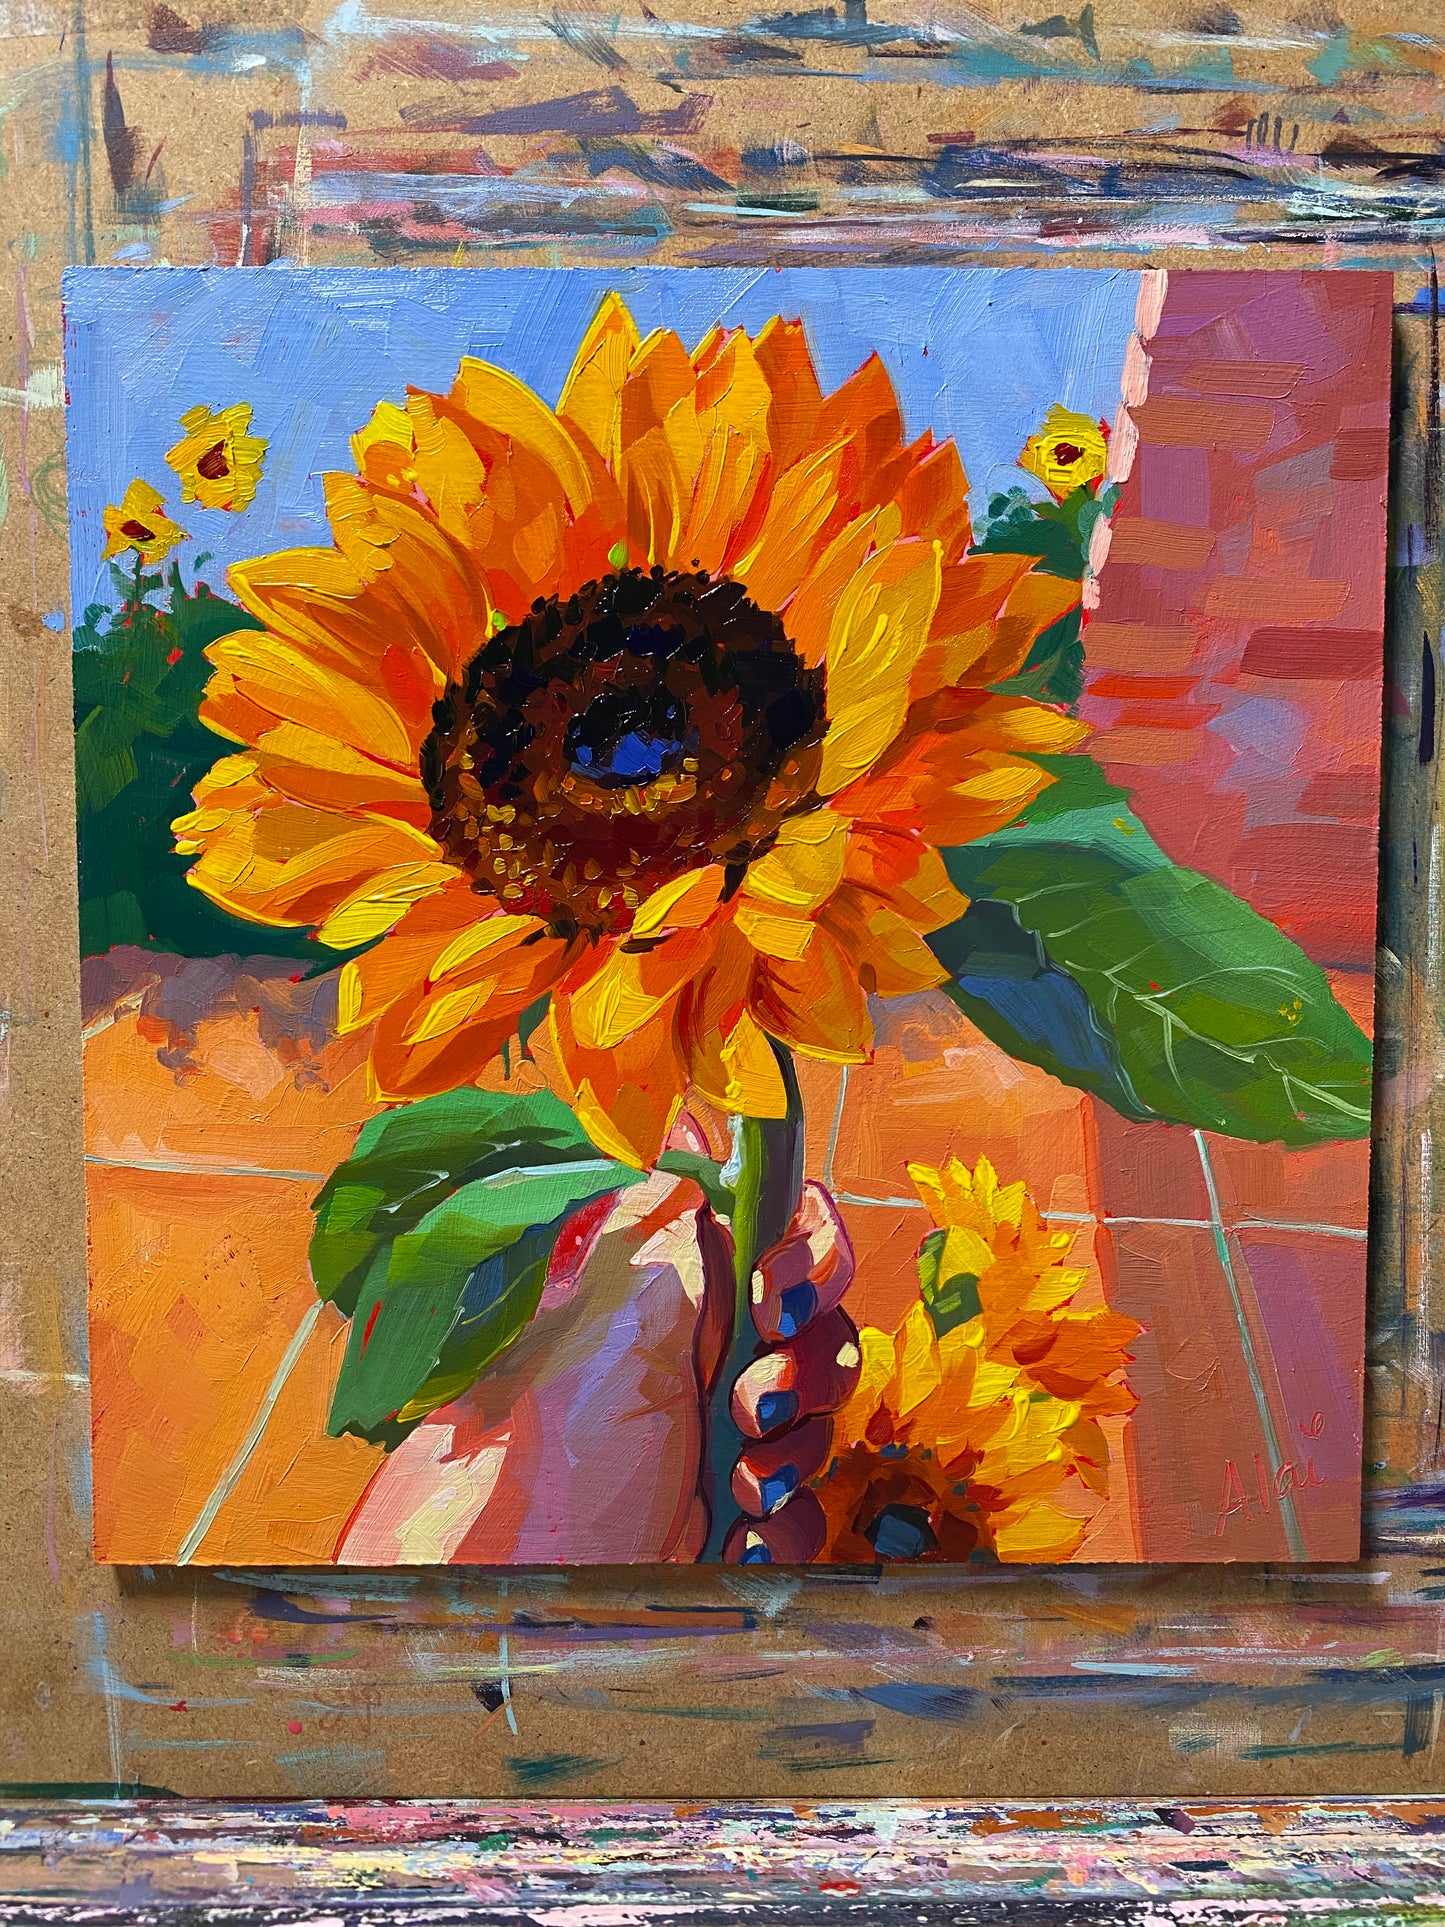 Holding a sunflower - Original Oil Painting